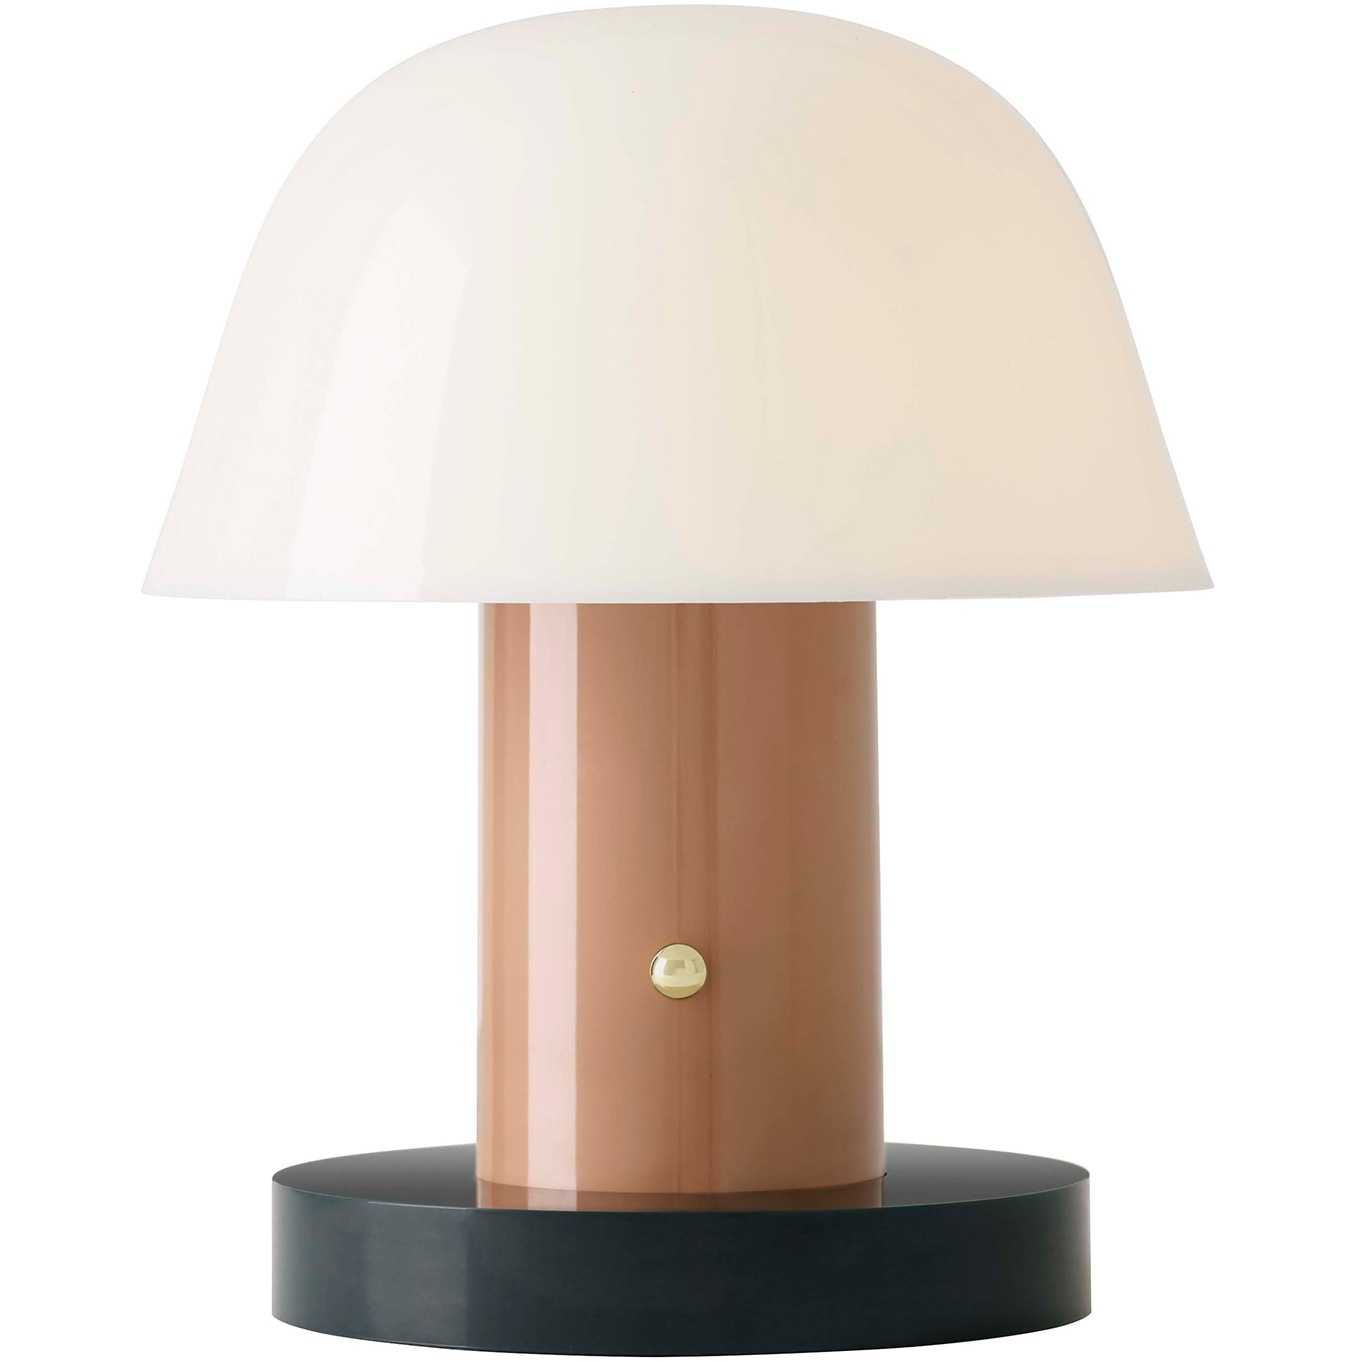 Setago JH27 Table Lamp Portable, Nude / Forest